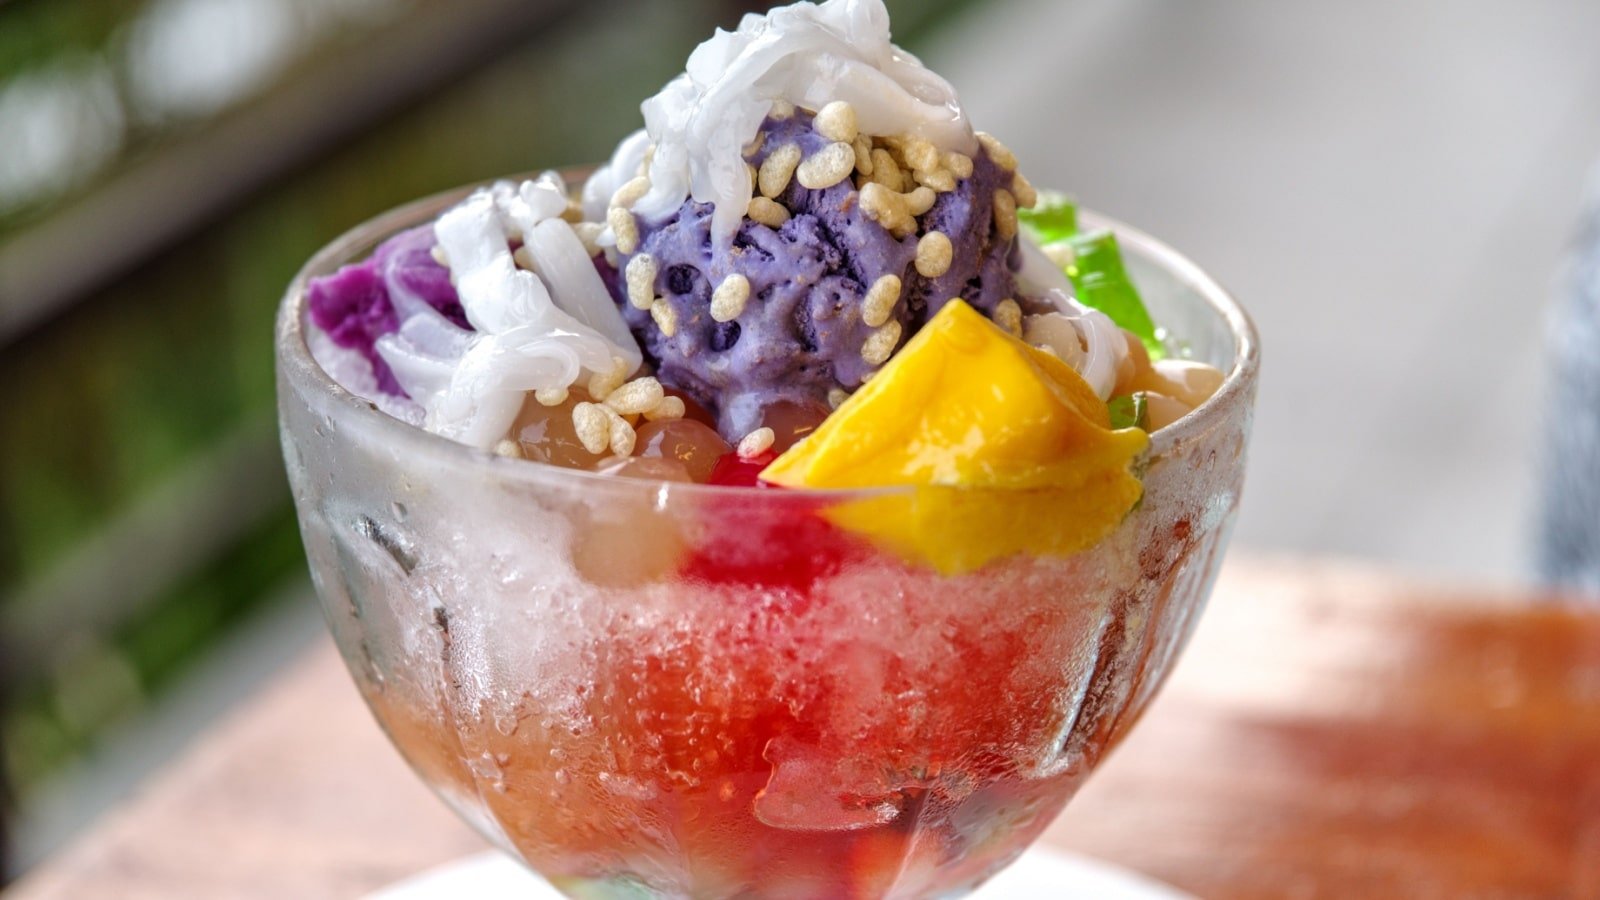 <p><span>In the Philippines, halo-halo is the go-to street food for a refreshing treat on a hot day. This colorful dessert consists of shaved ice, evaporated milk, various fruits, and sweet beans. It’s the perfect balance of sweetness and texture, making it a must-try in the Philippines.</span></p><p><span>The name halo-halo translates to “mix-mix,” and that’s precisely what you do before indulging in this delightful concoction. Each spoonful is a surprise, offering a distinct combination of flavors and textures, just like the diverse culture of the Philippines itself. Whether you’re a seasoned foodie or a curious traveler, the vibrant, multi-layered experience of devouring a halo-halo is a unique, delightful gastronomic adventure you’d not want to miss.</span></p>